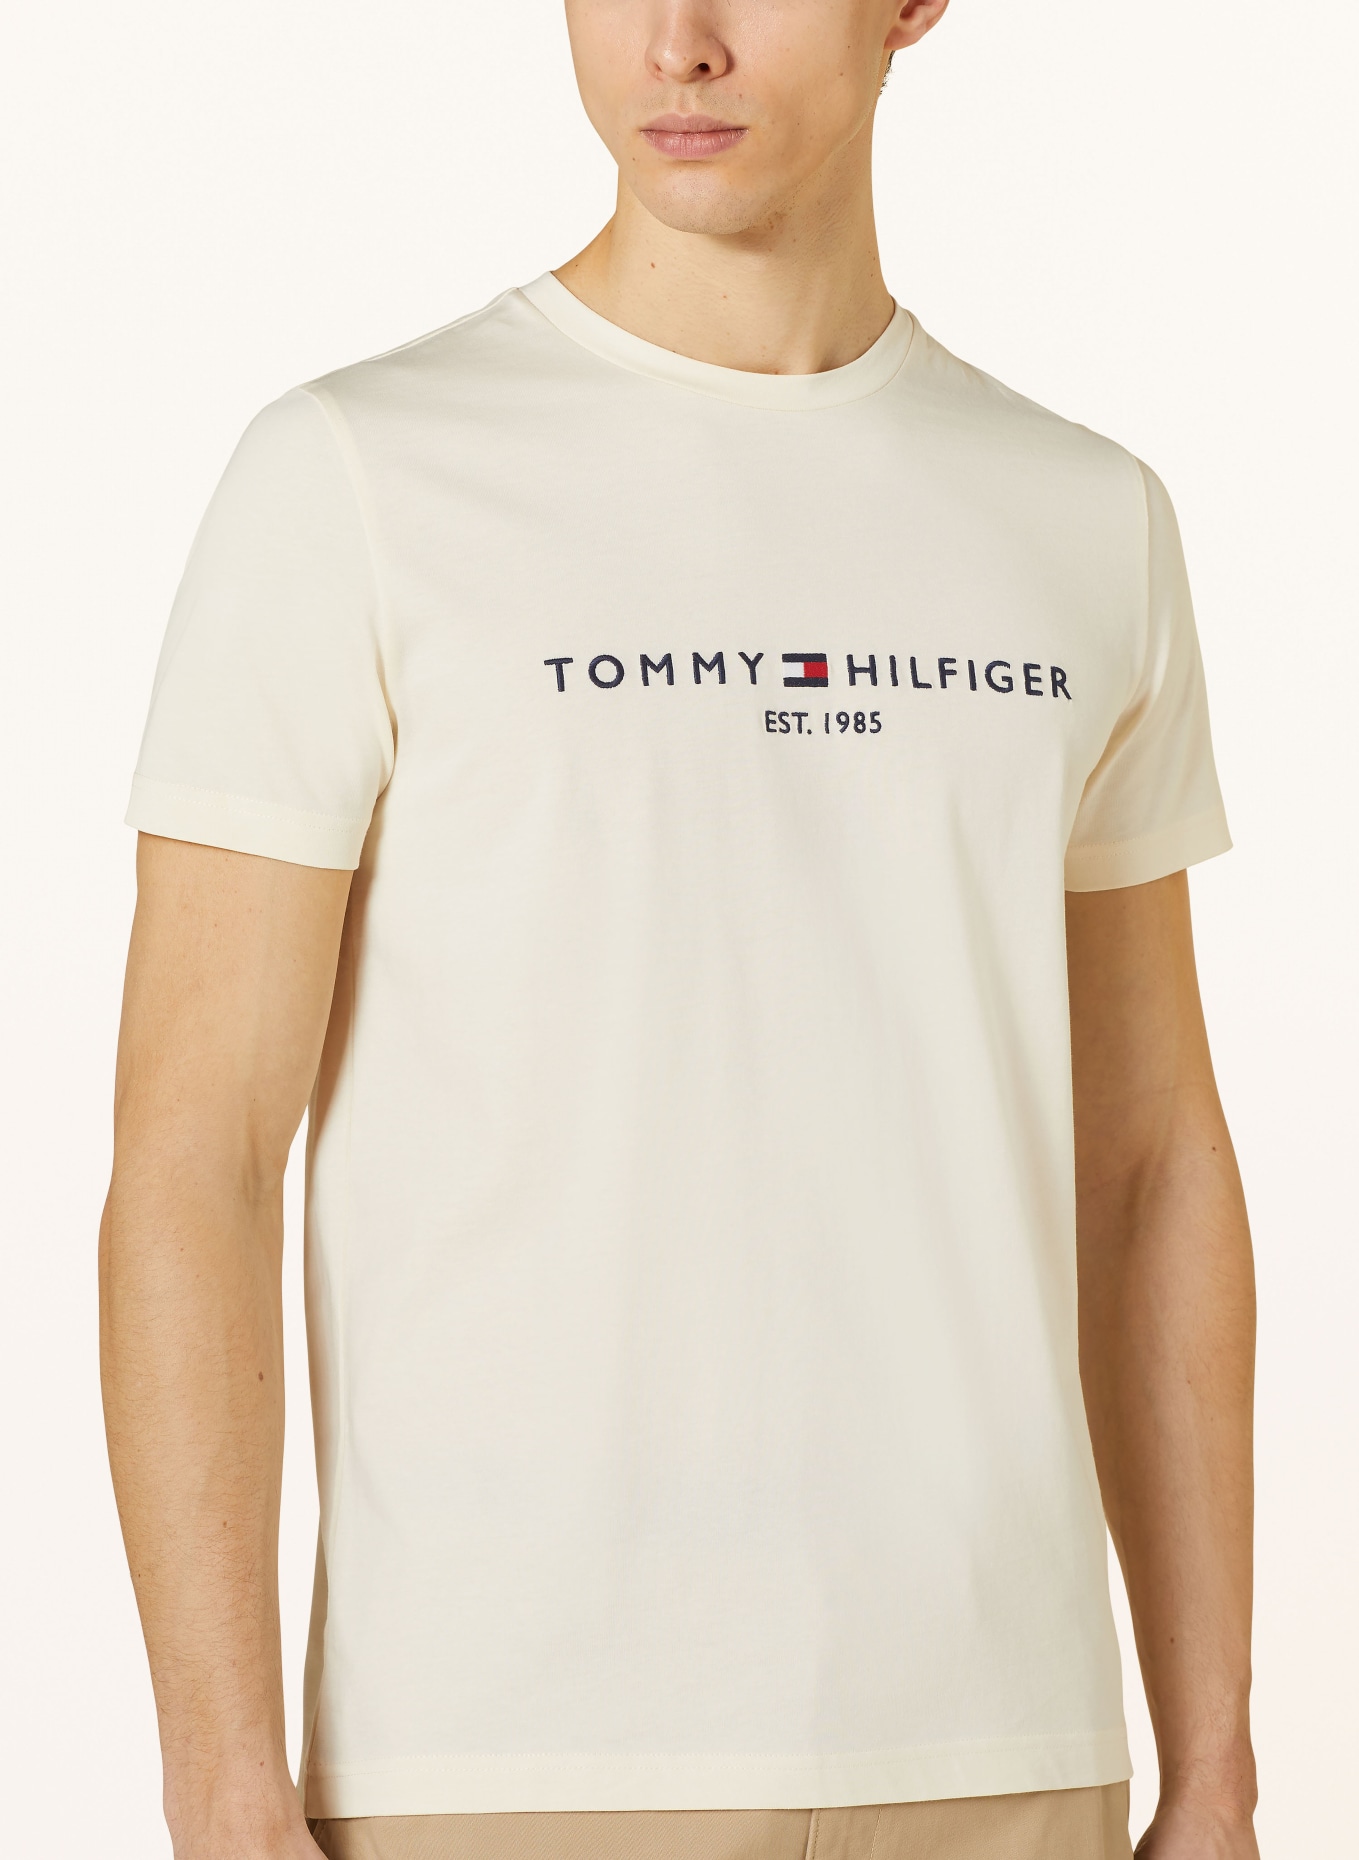 TOMMY HILFIGER T-shirt, Color: LIGHT YELLOW (Image 4)